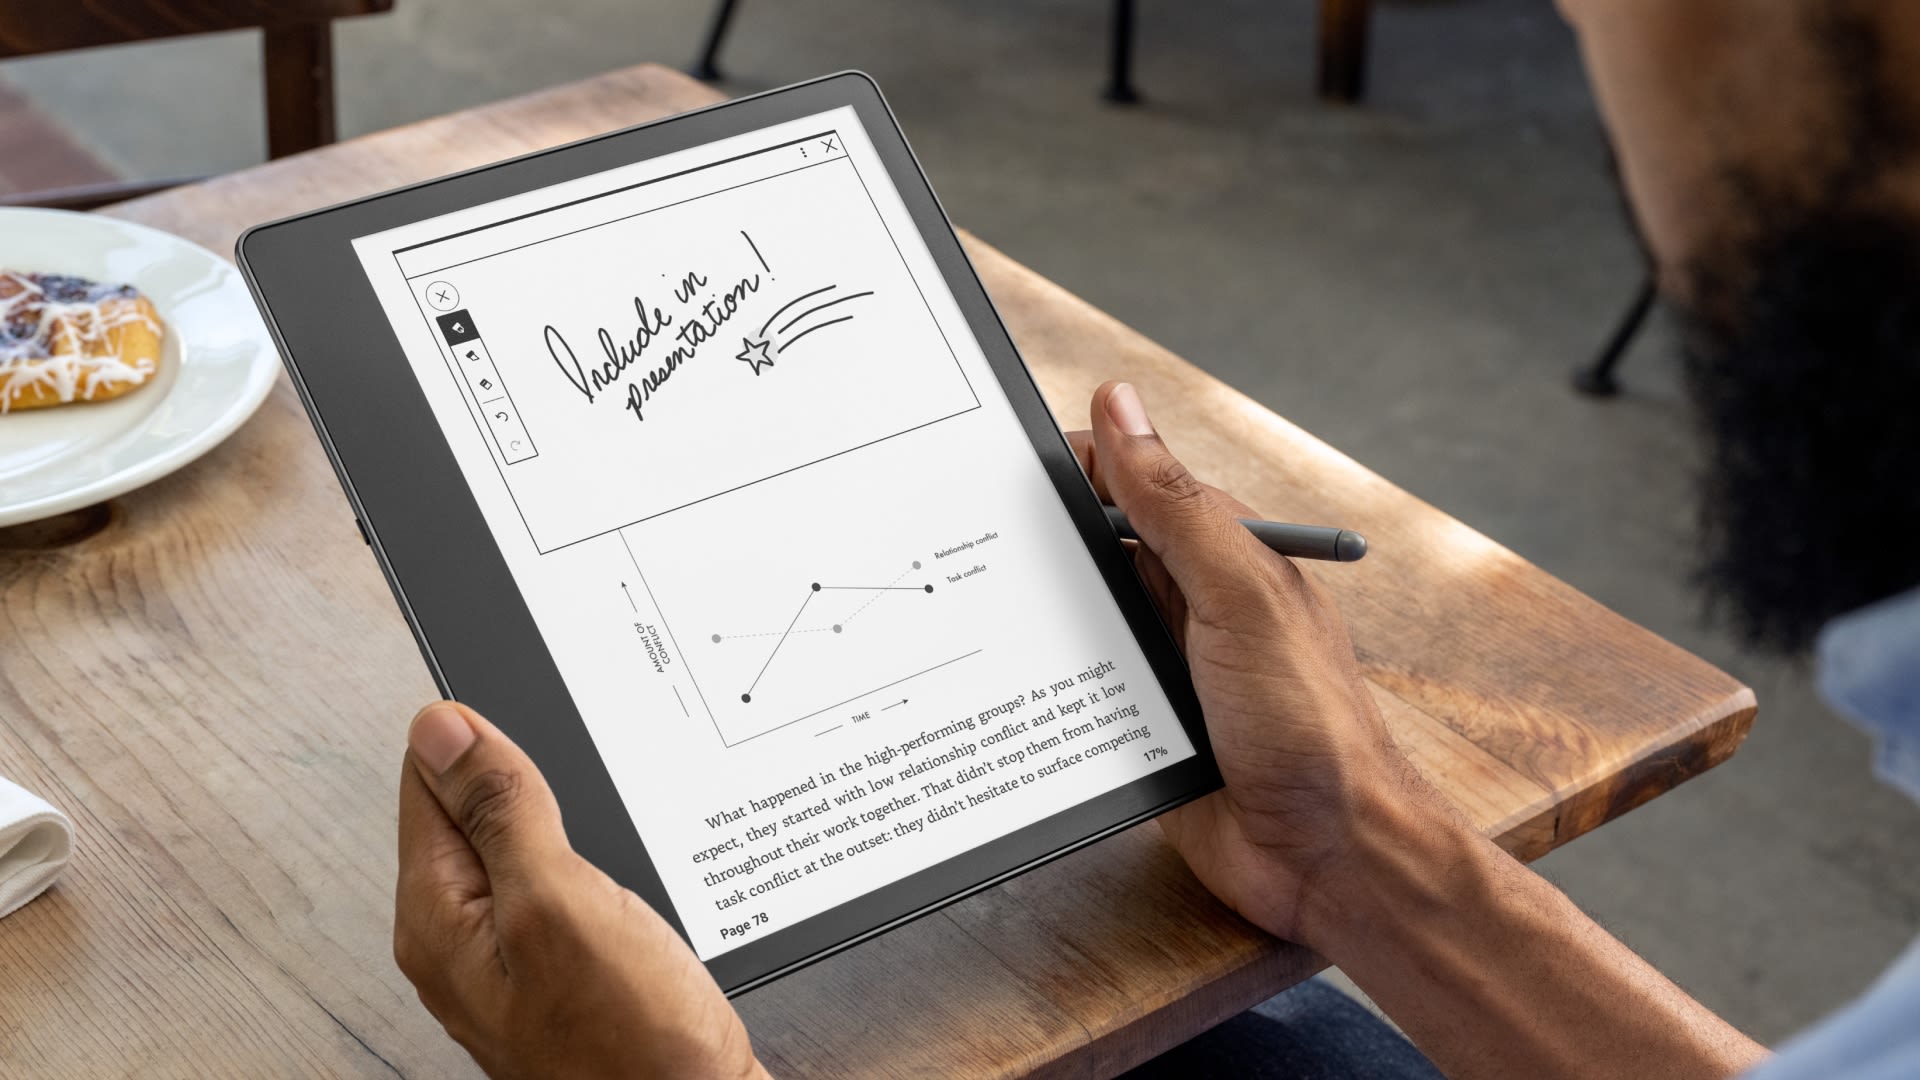 Amazon’s Kindle Scribe Is On Sale for Mother’s Day! Save Up to $150 Off With This Limited Deal